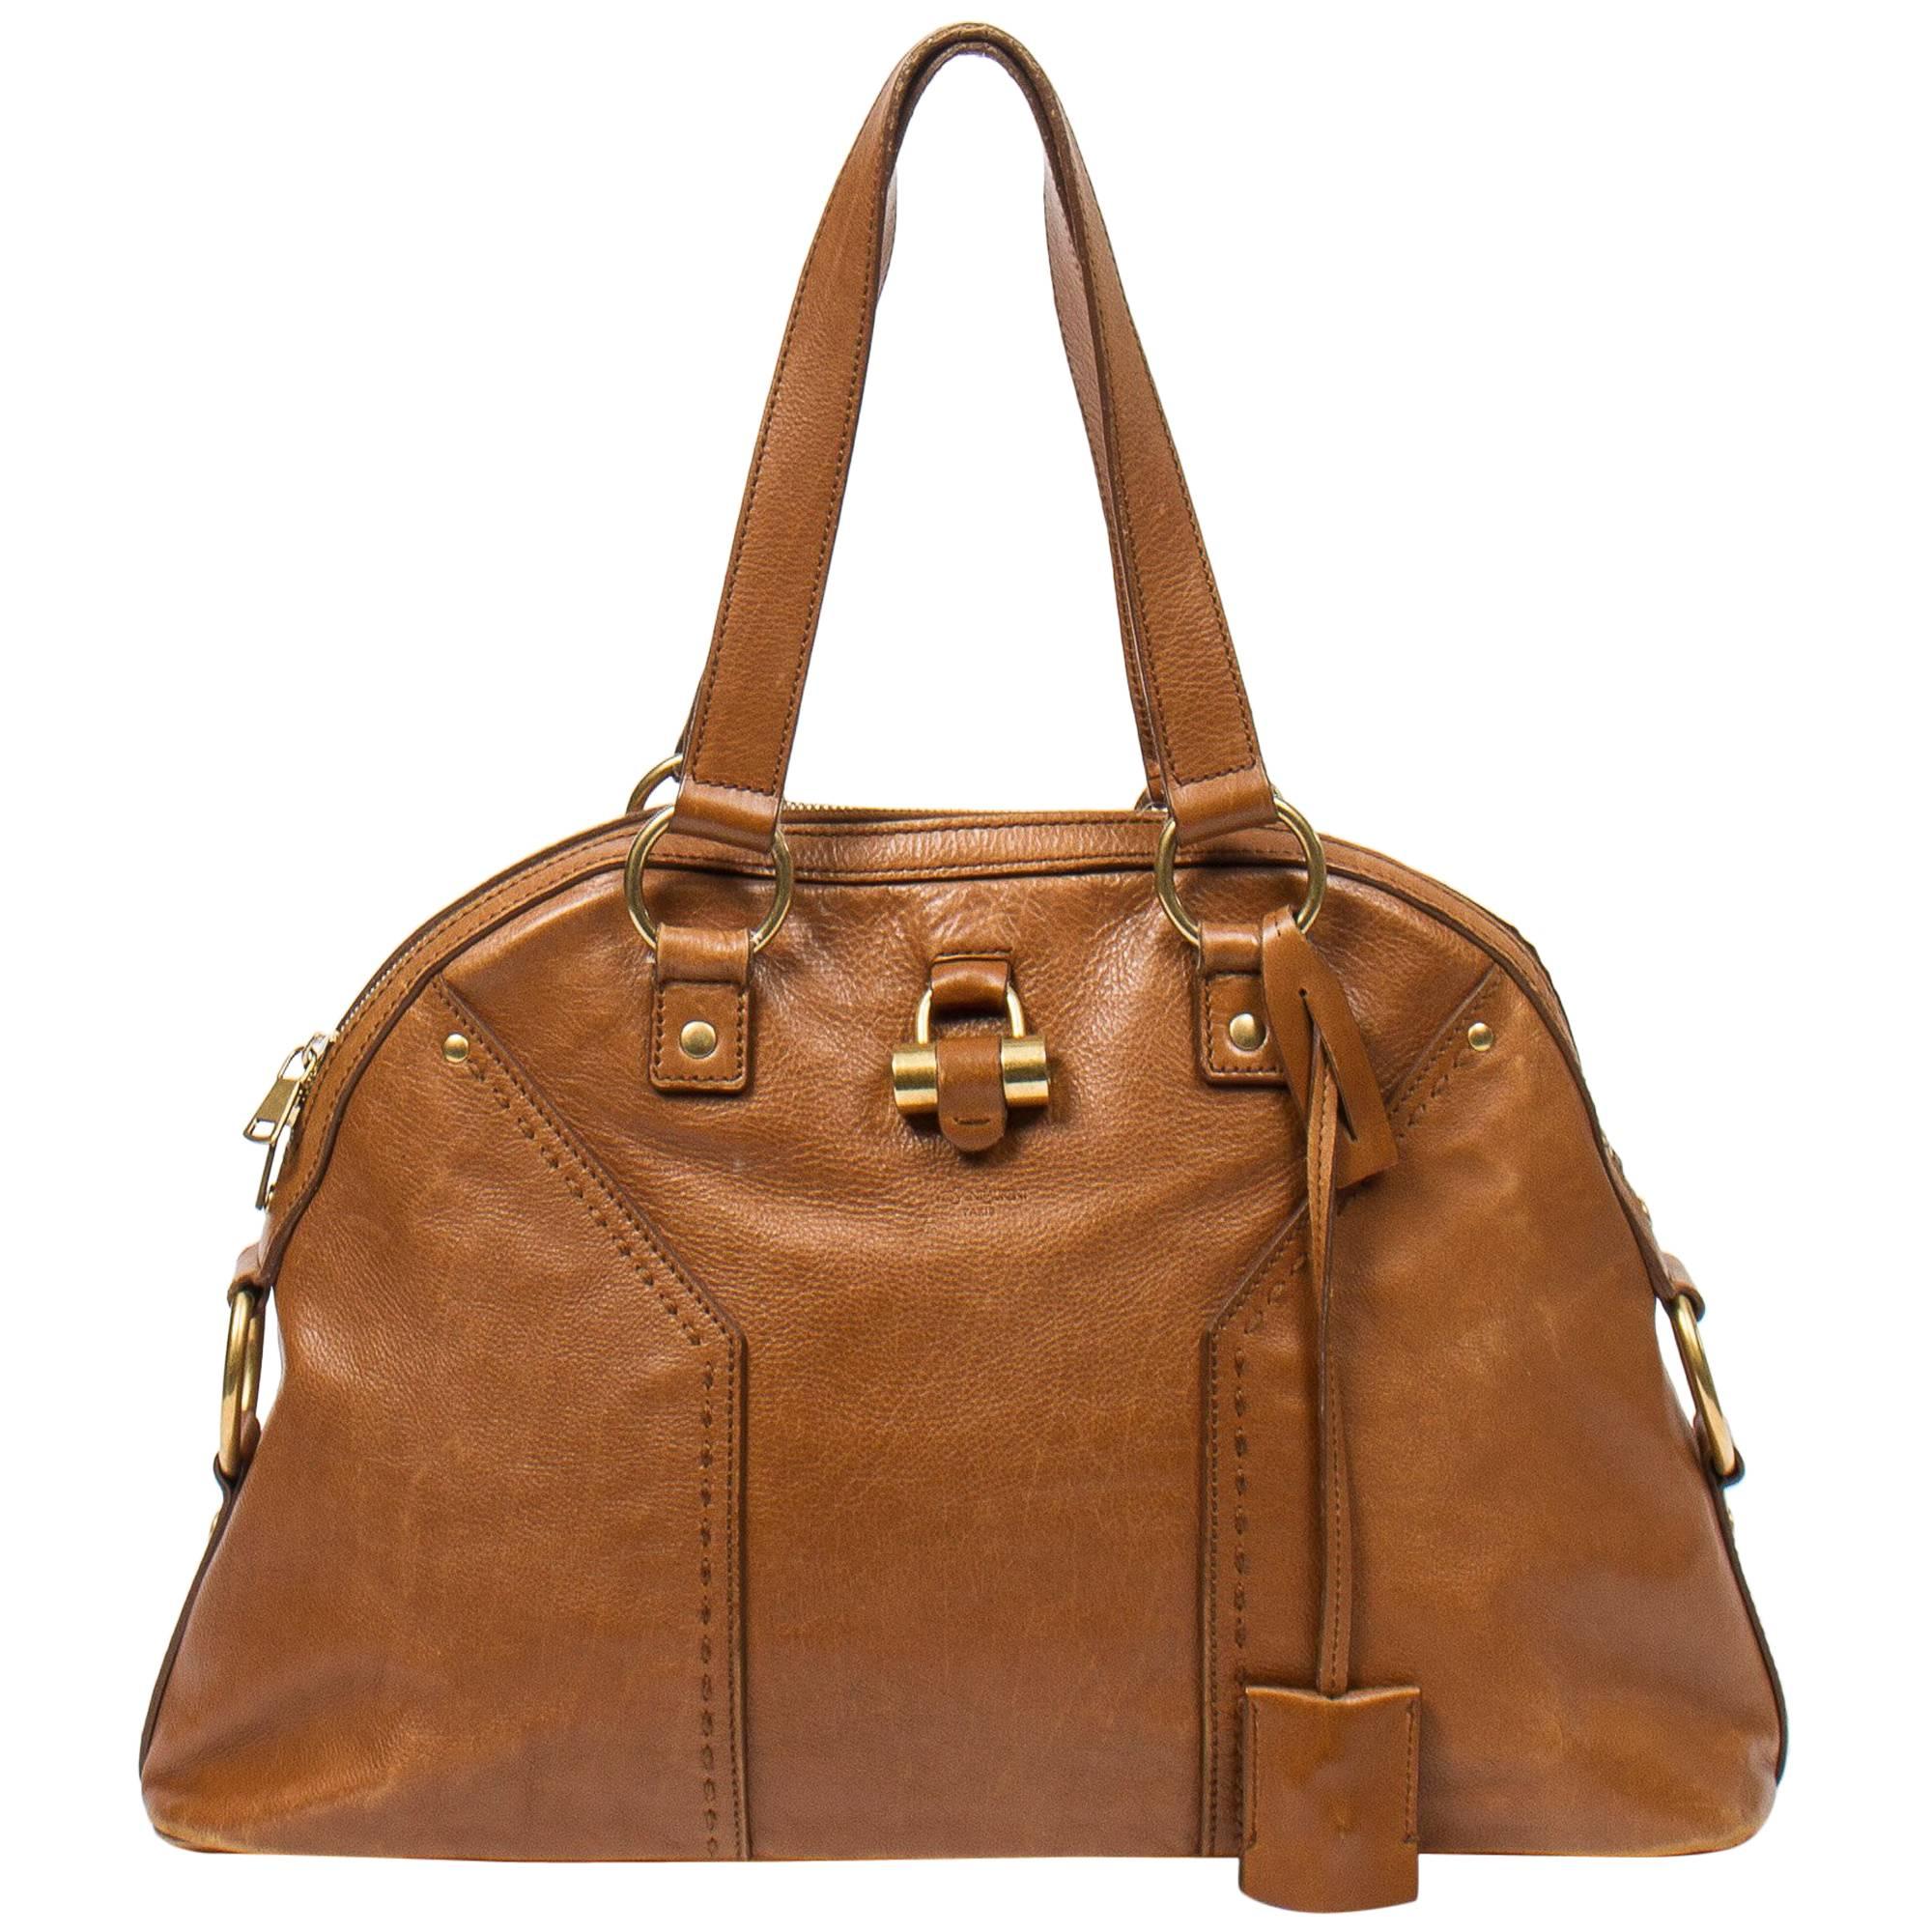 Yves Saint-Laurent Muse 1 MM in light brown small grained leather